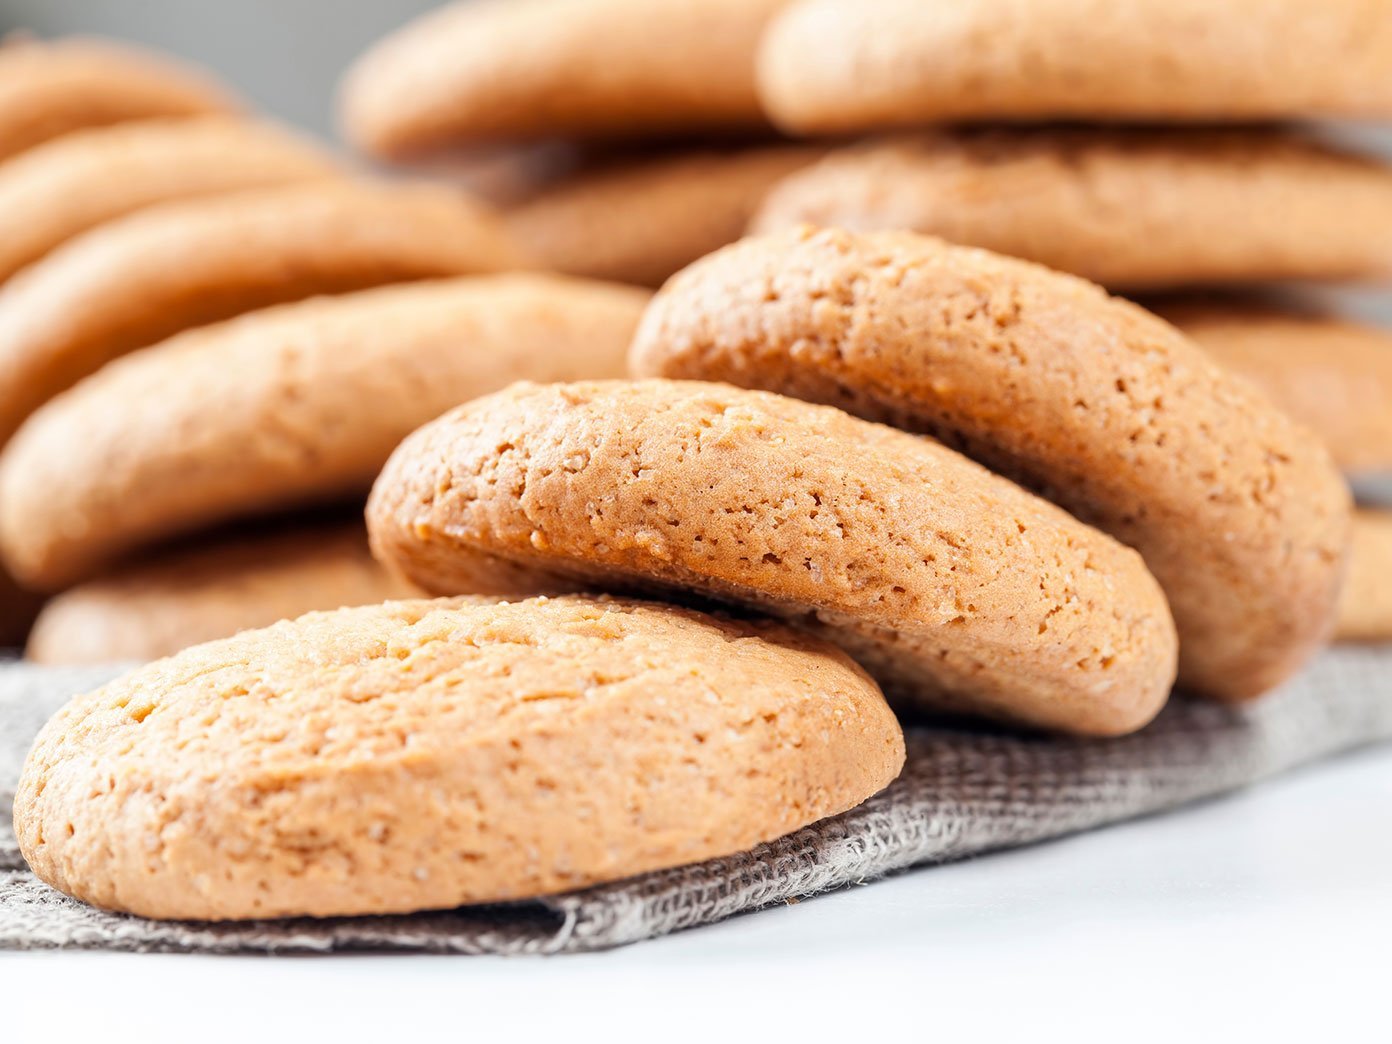 Round Cookies Made From Wheat And Oat Flour